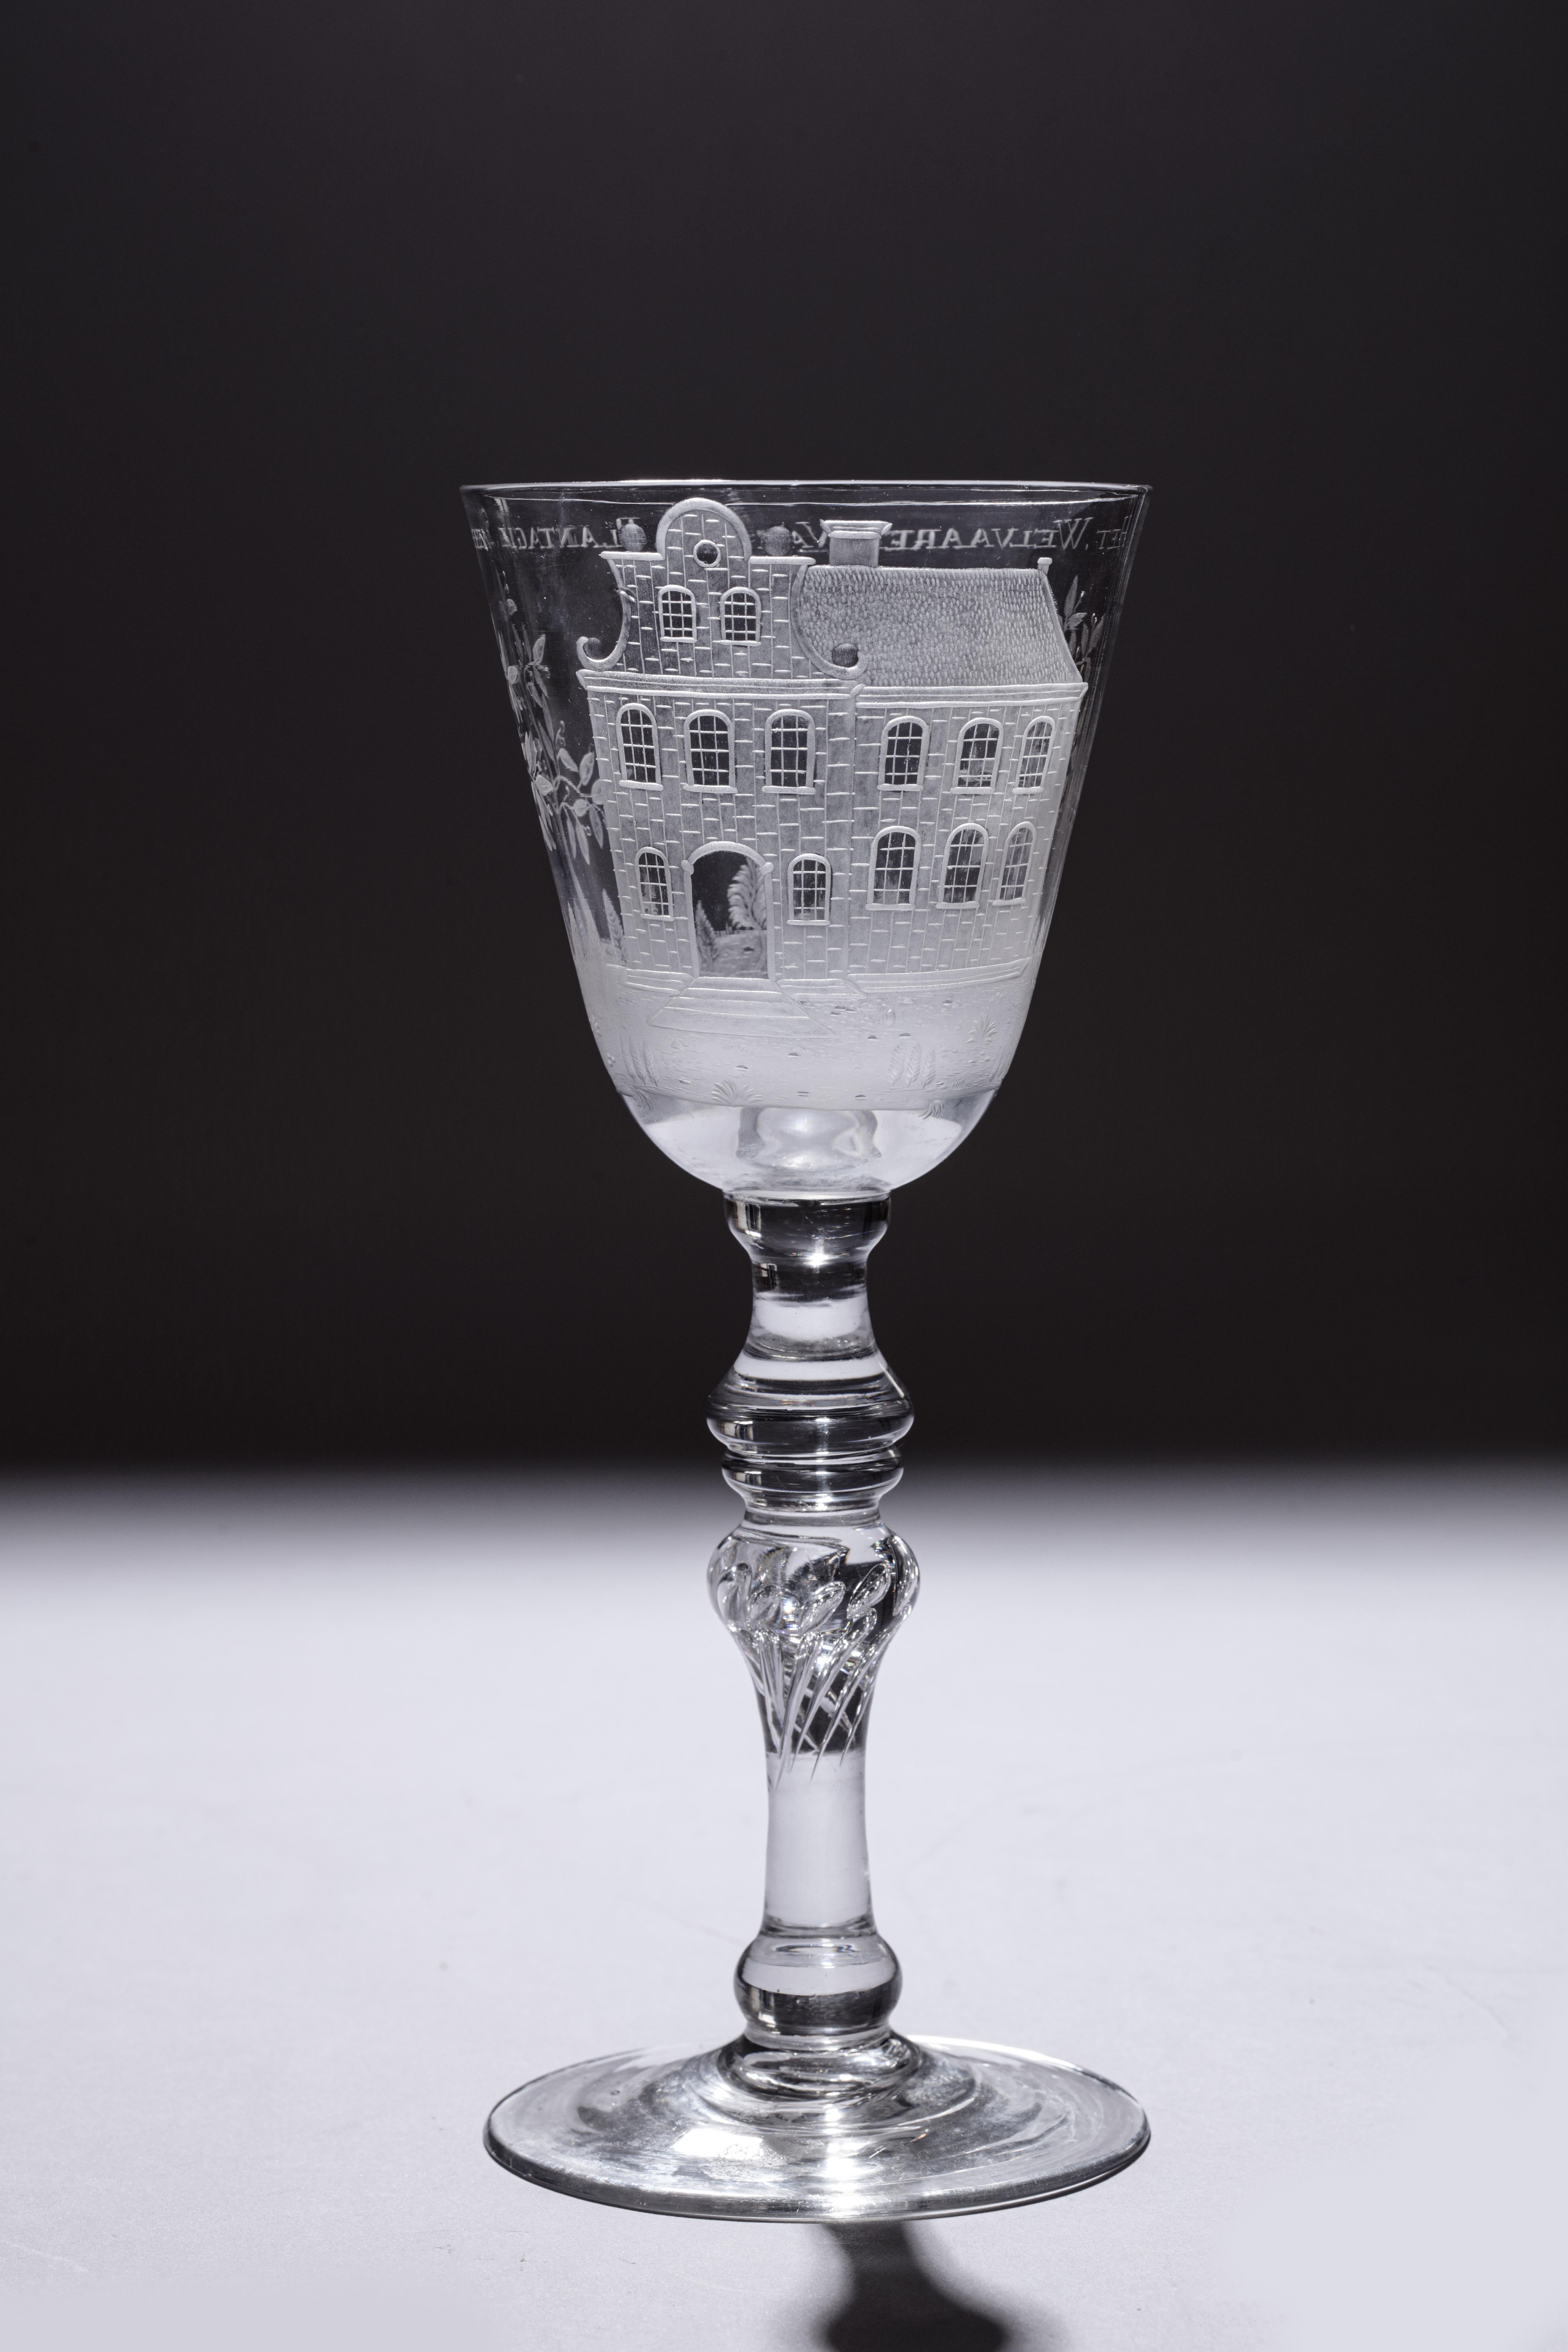 A splendid commemorating glass with a fine engraving of a plantation house and coffee shrubs with a text reading: Het.Welvaaren.Van.De.Plantagie.Saxen (the prosperity of the Plantation Saxen)

English or Dutch lead glass, with Dutch